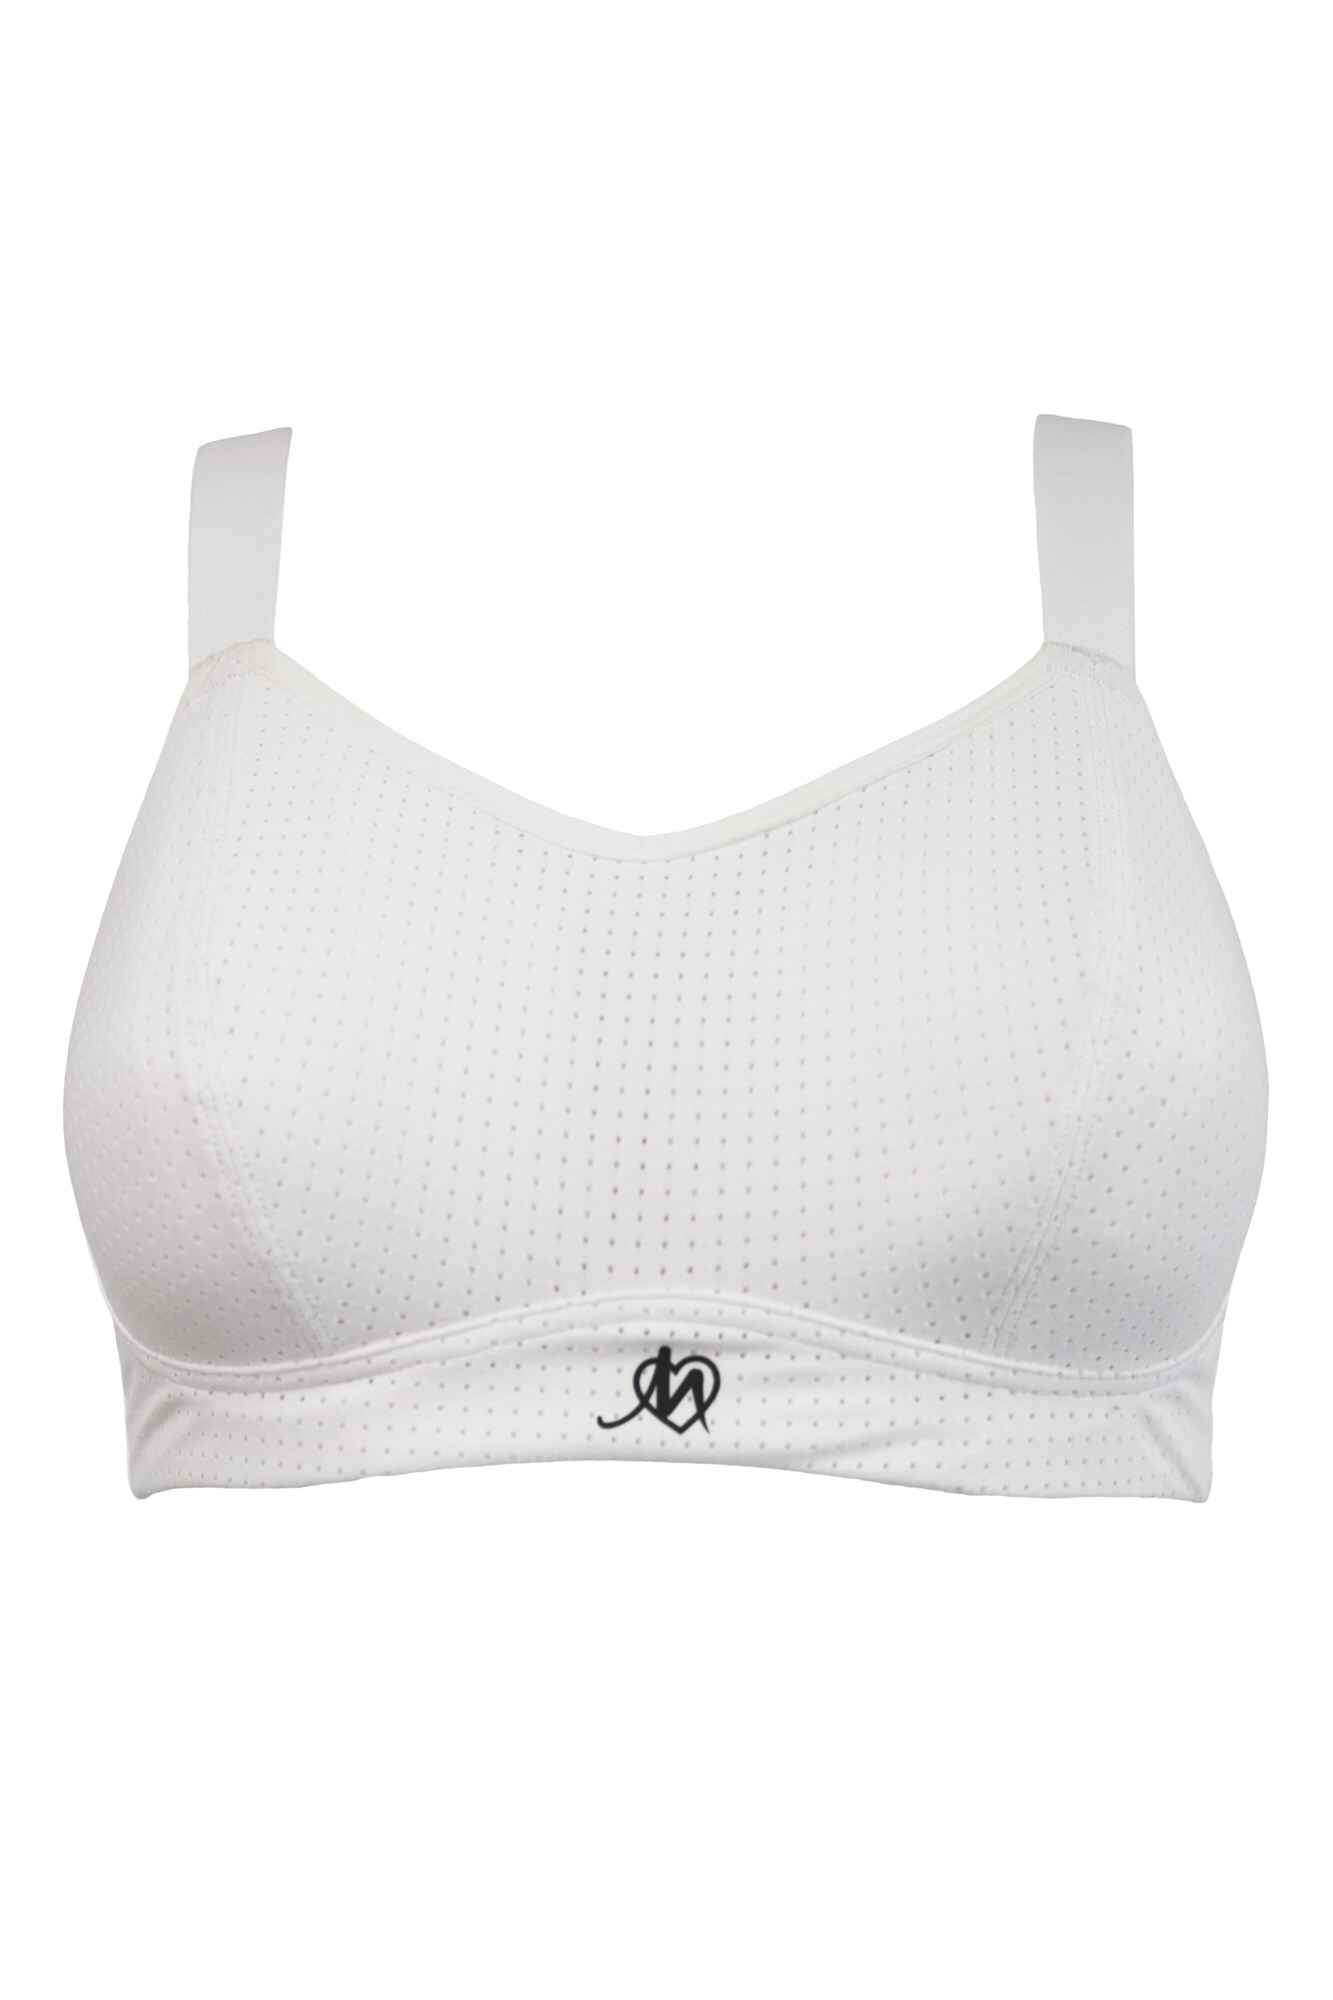 Myprotein MP Women's High Support Moulded Cup Sports Bra - White - 30D